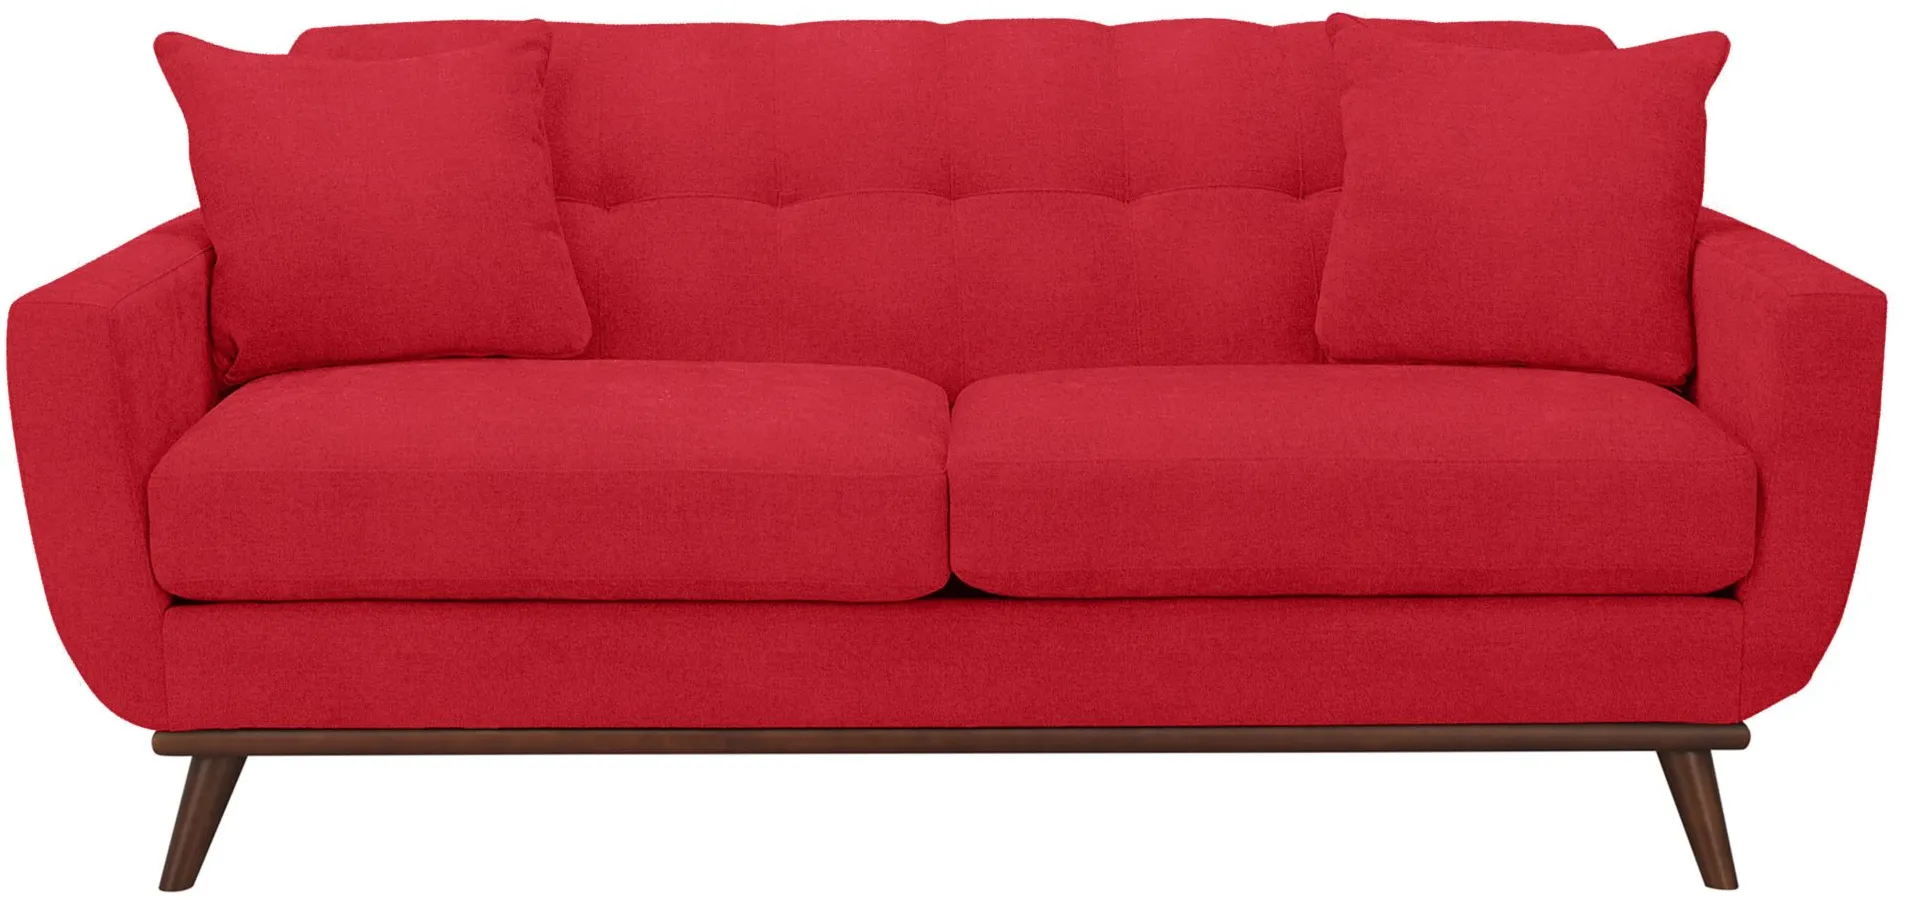 Milo Apartment Sofa in Suede-So-Soft Cardinal by H.M. Richards